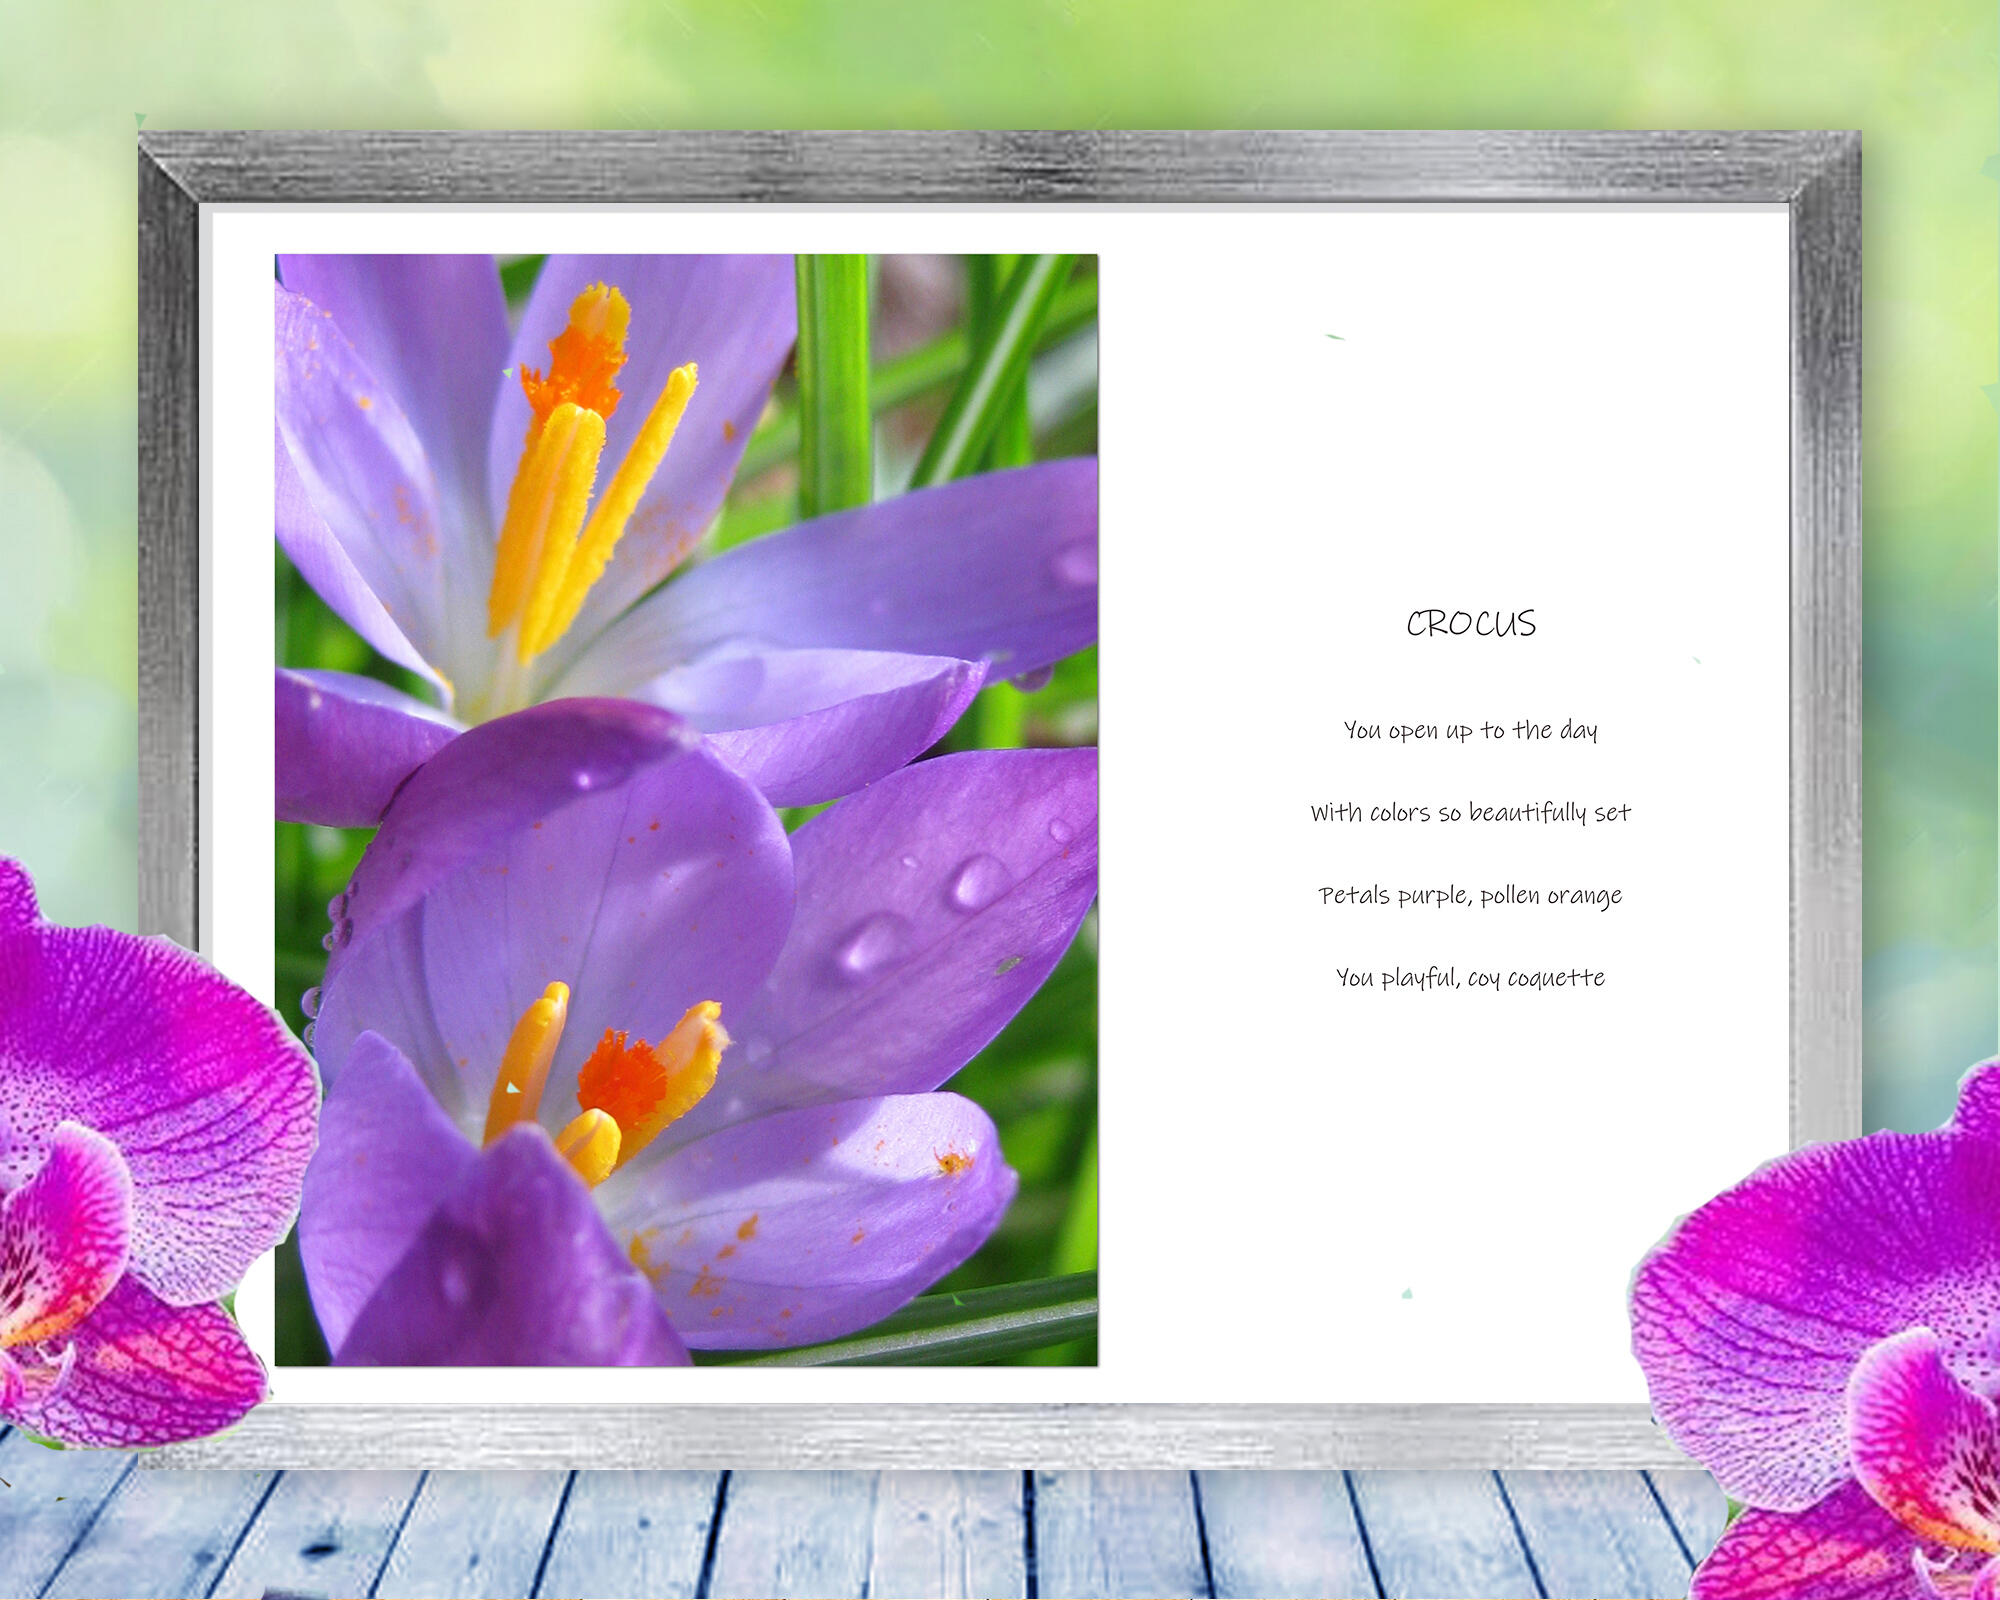 A dew covered crocus rejoices in the morning light in this beautiful, sensual, spring flower photo. Print with Poem-Crocus by The Poetry of Nature